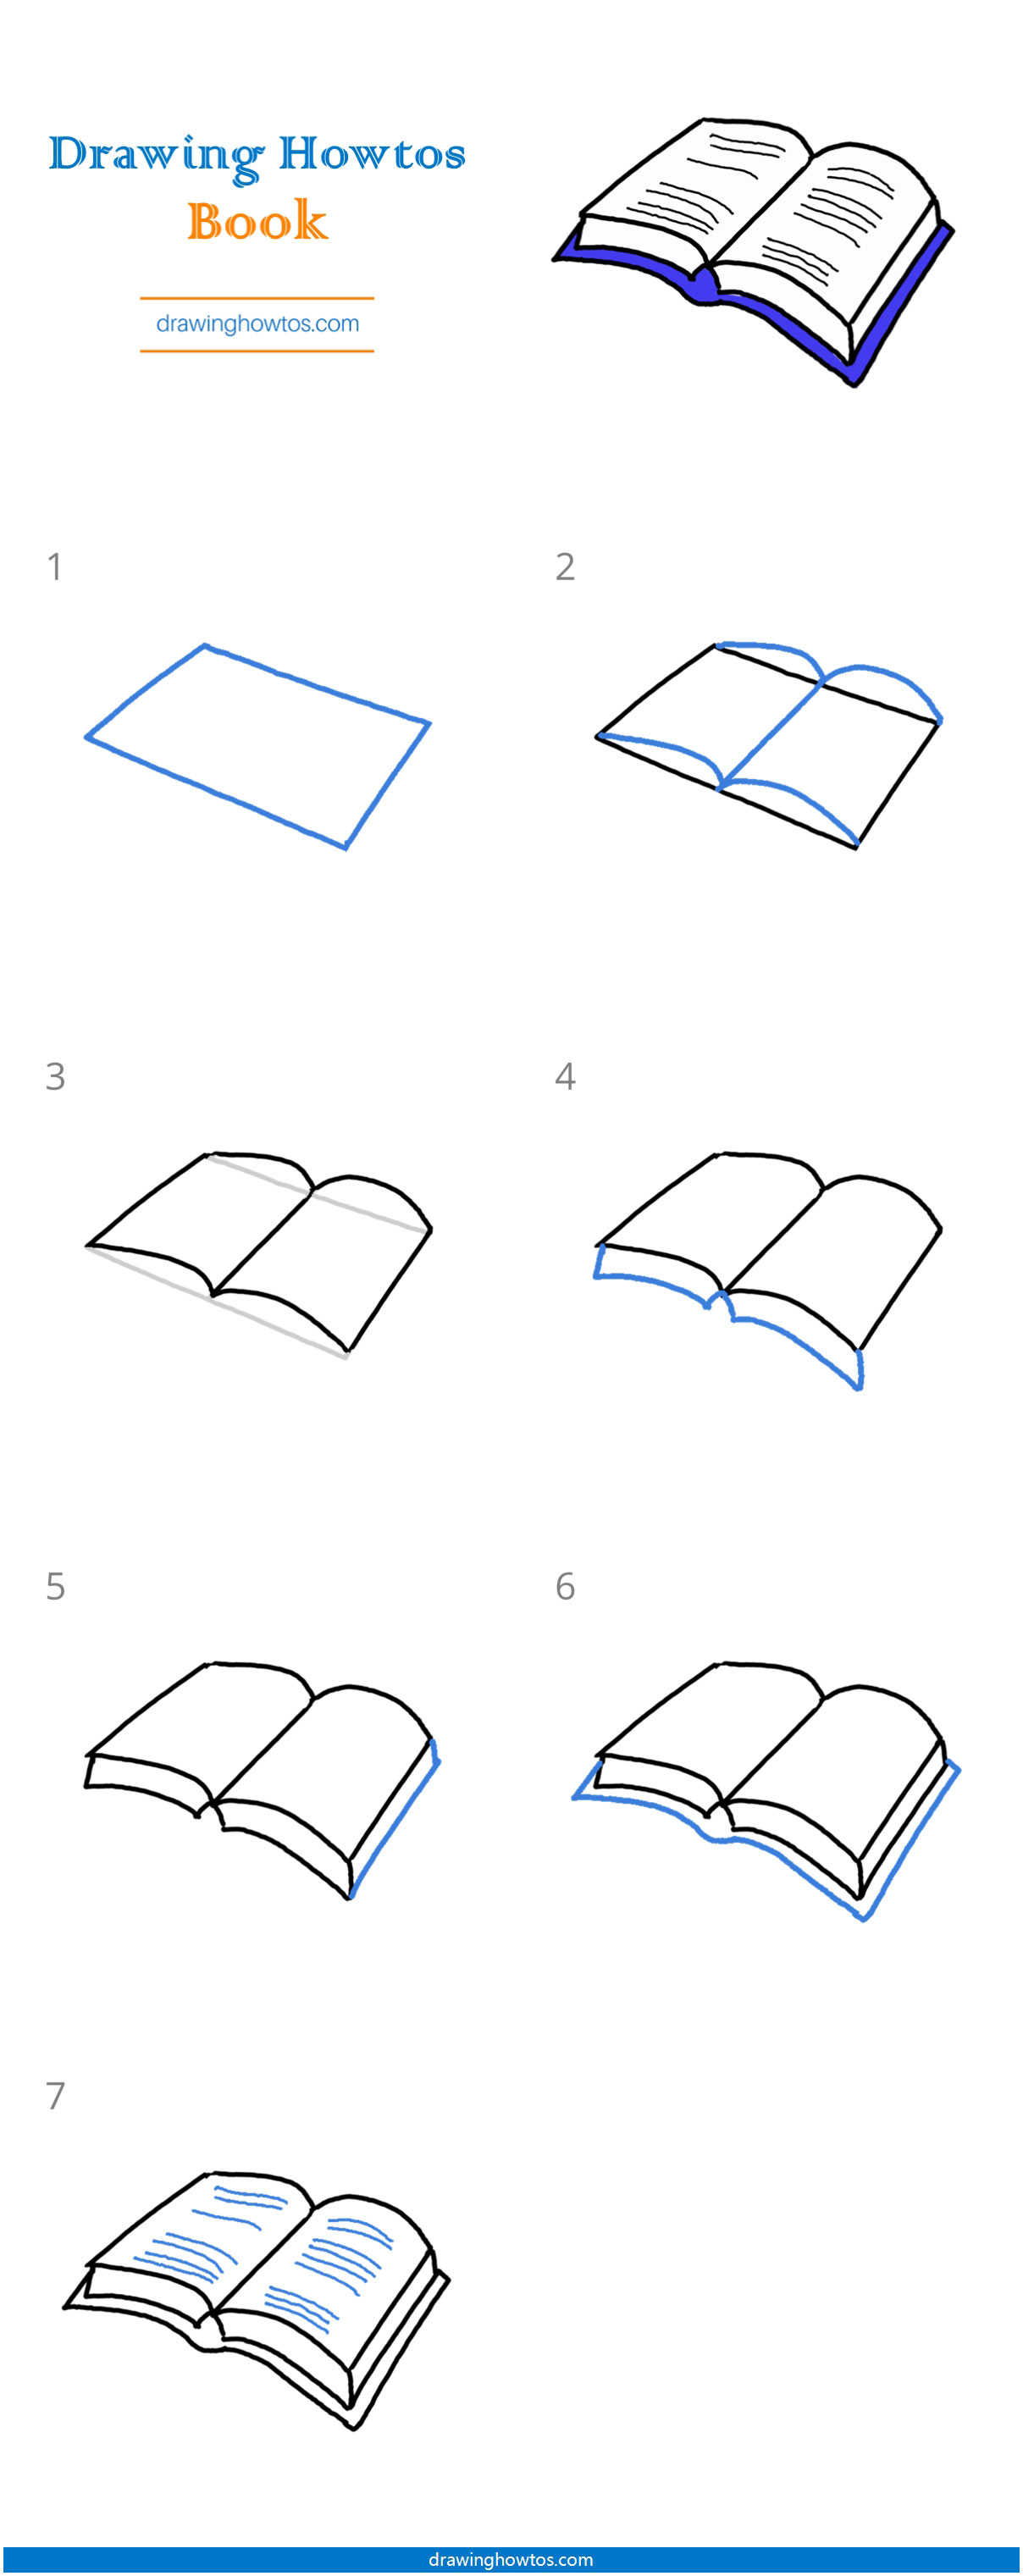 How to draw an open book with a pencil step-by-step drawing